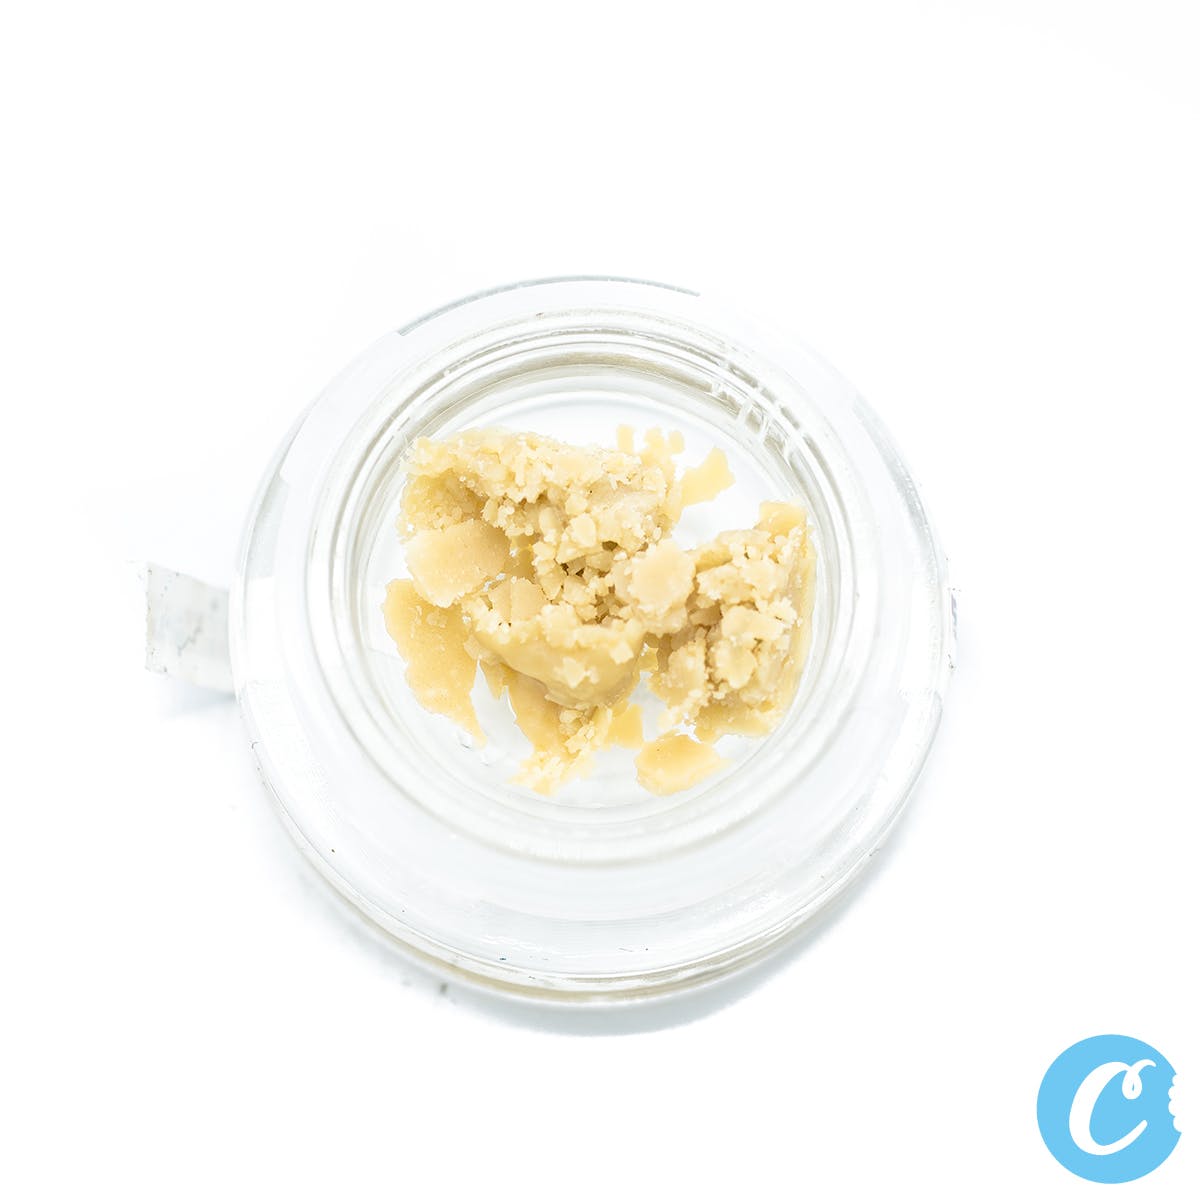 wax-swog-solventless-hash-rosin-by-frosty